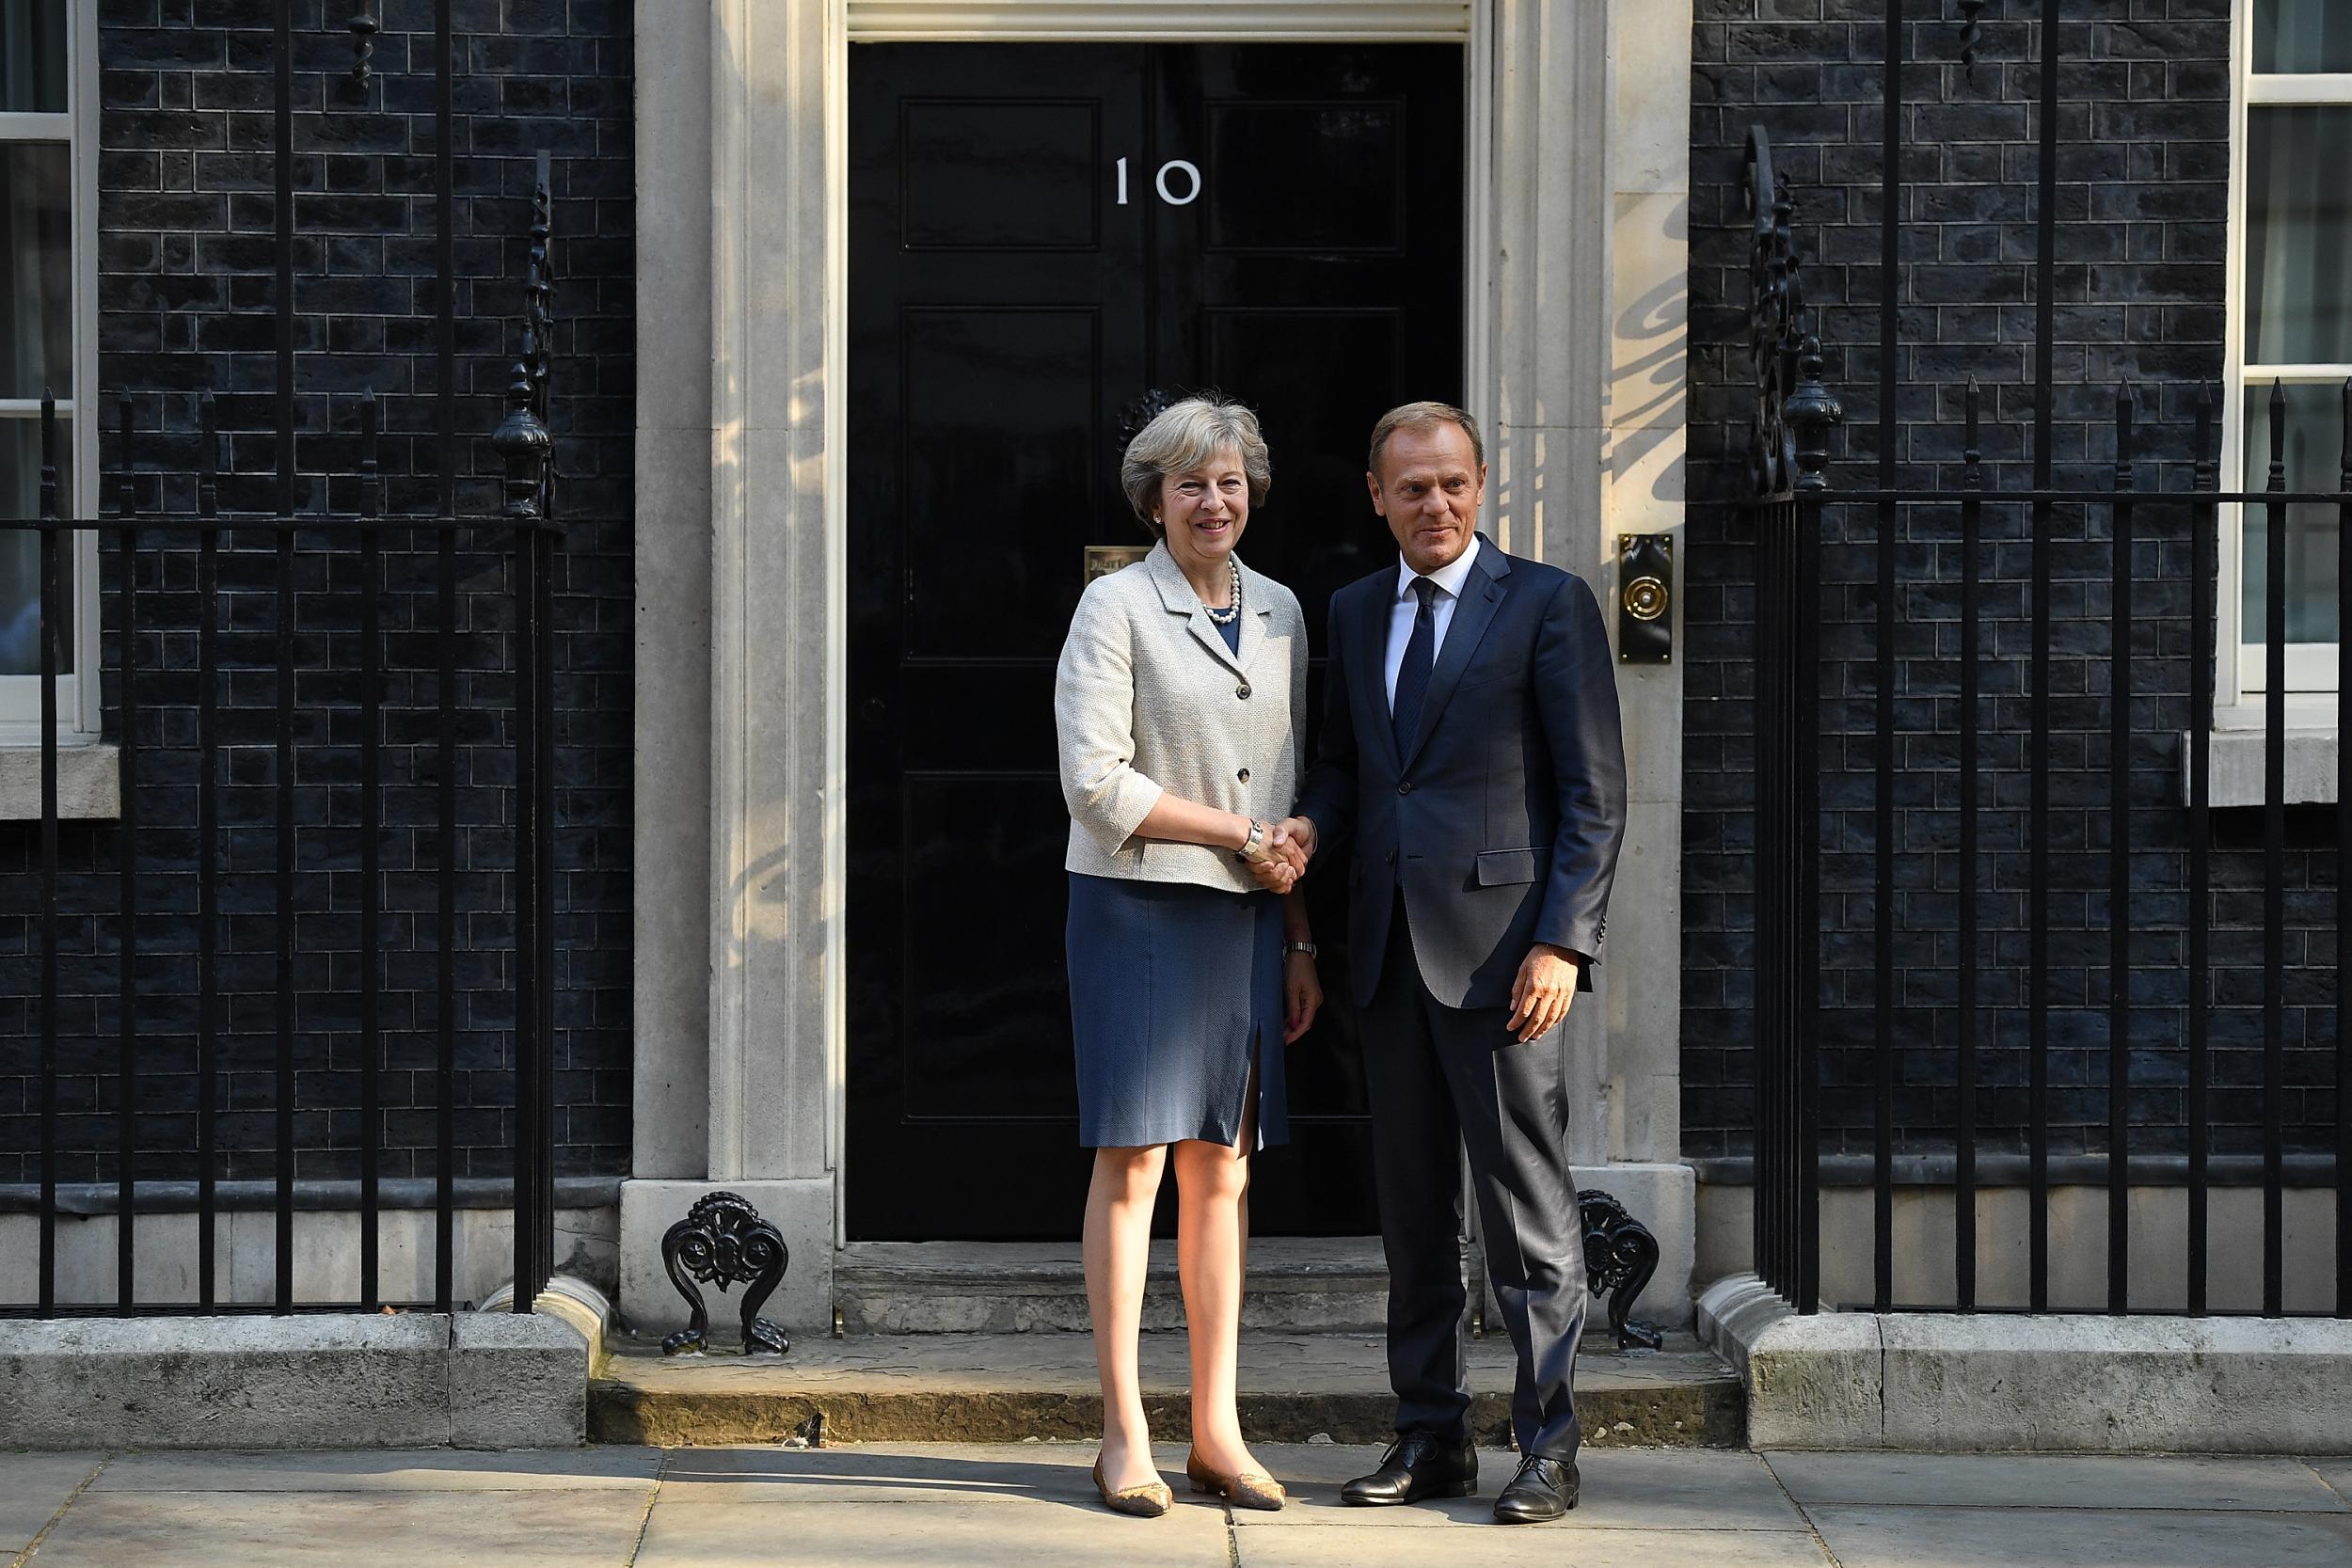 Theresa May greets Donald Tusk in Downing Street at a previous meeting in September last year